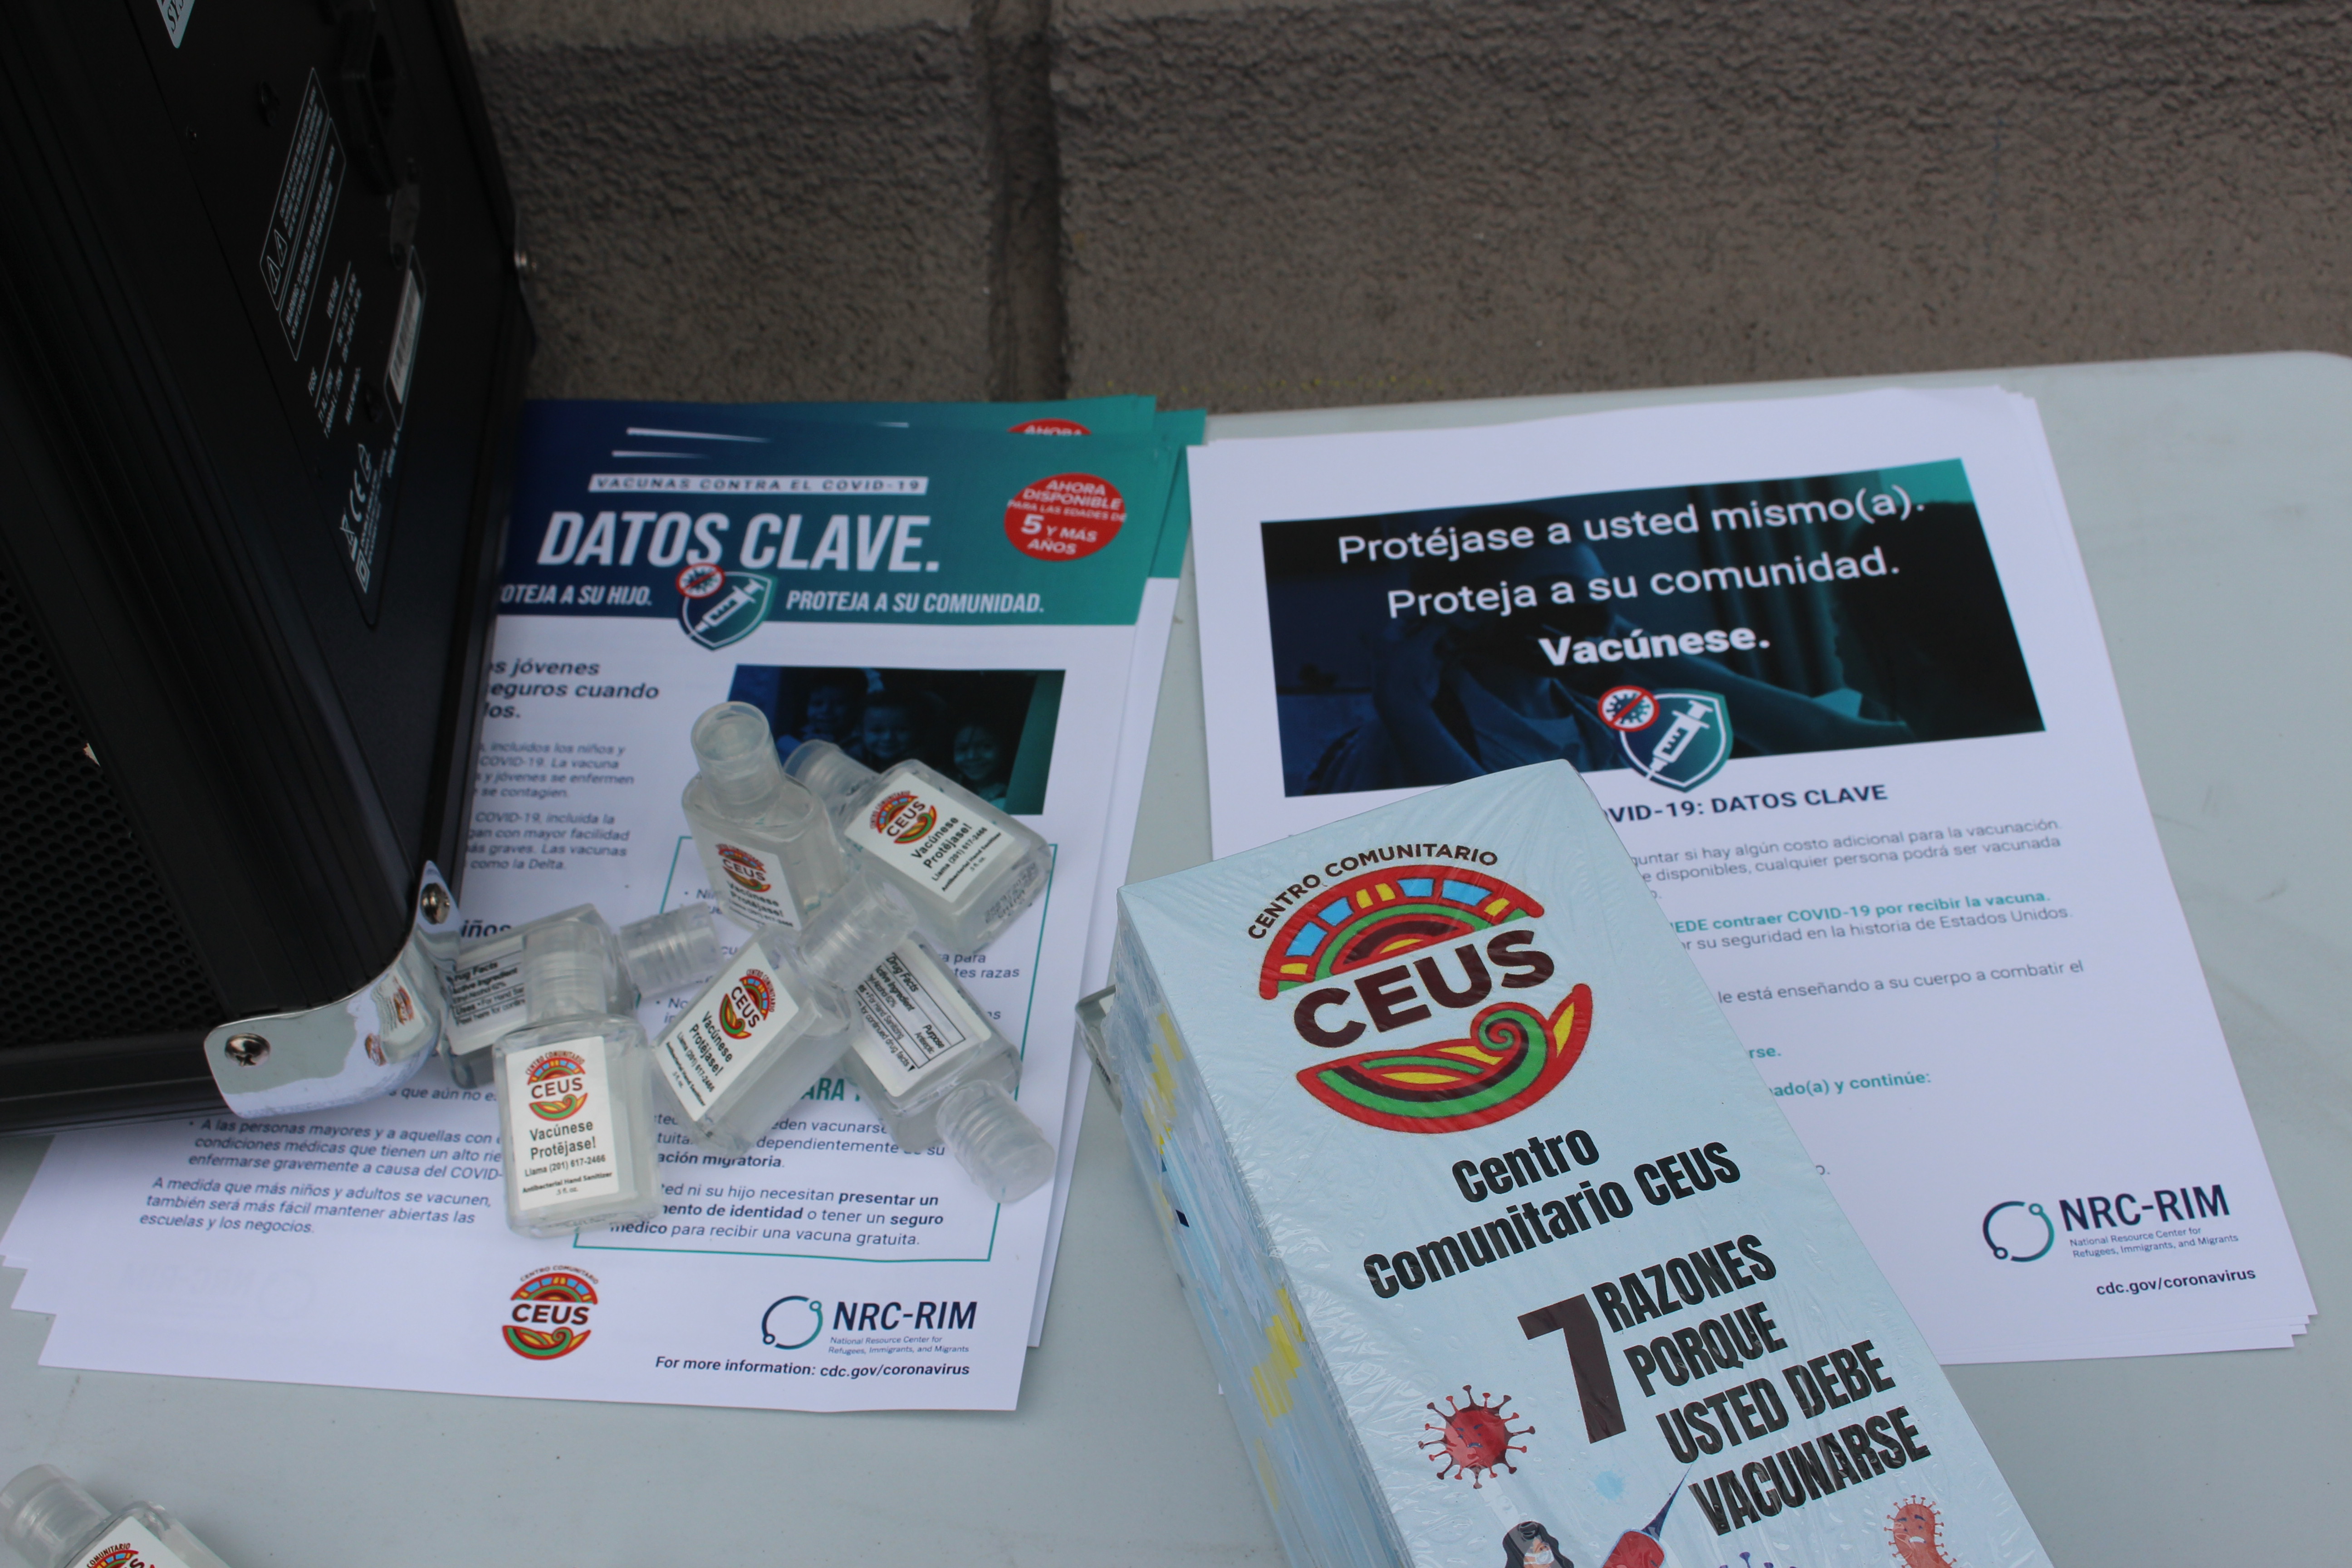 Centro Comunitario CEUS, a New Jersey nonprofit serving immigrants, displayed Spanish-language flyers explaining the need for vaccines from the National Resource Center for Refugees, Immigrants and Migrants. 